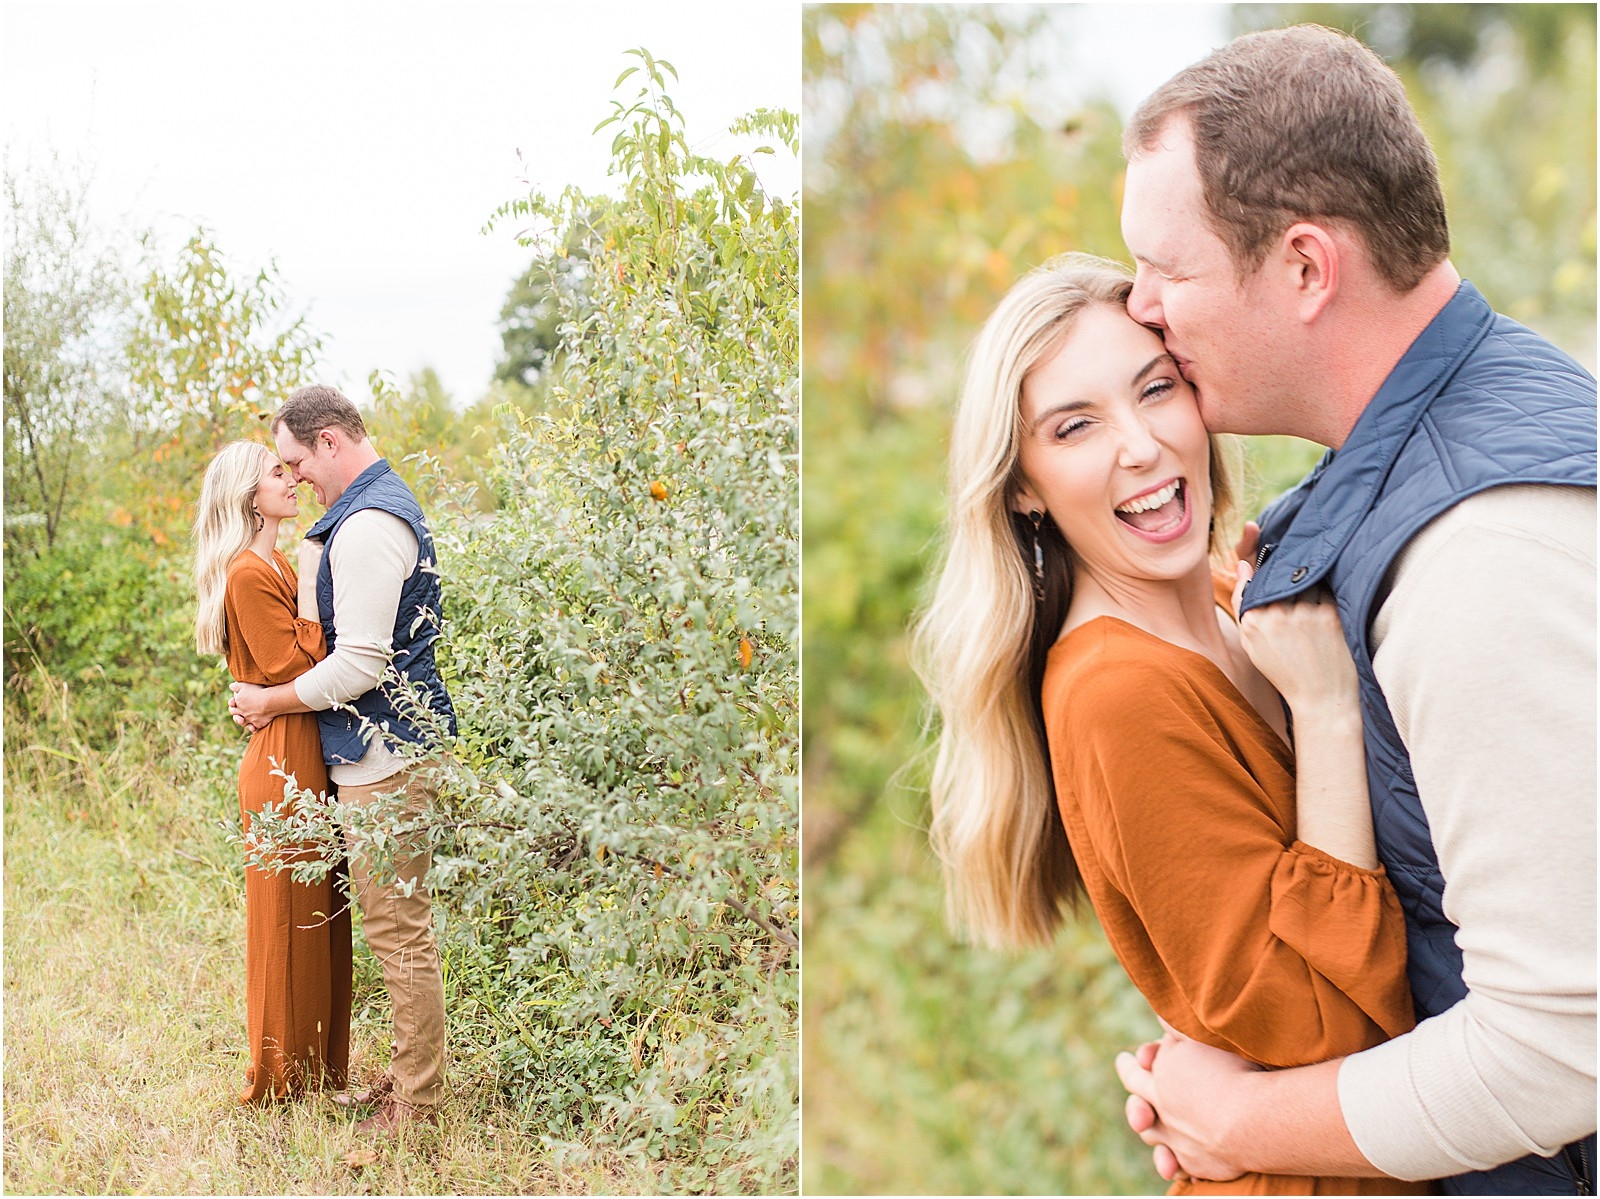 Kaitlyn and Andrew Engagement Session 0016.jpg